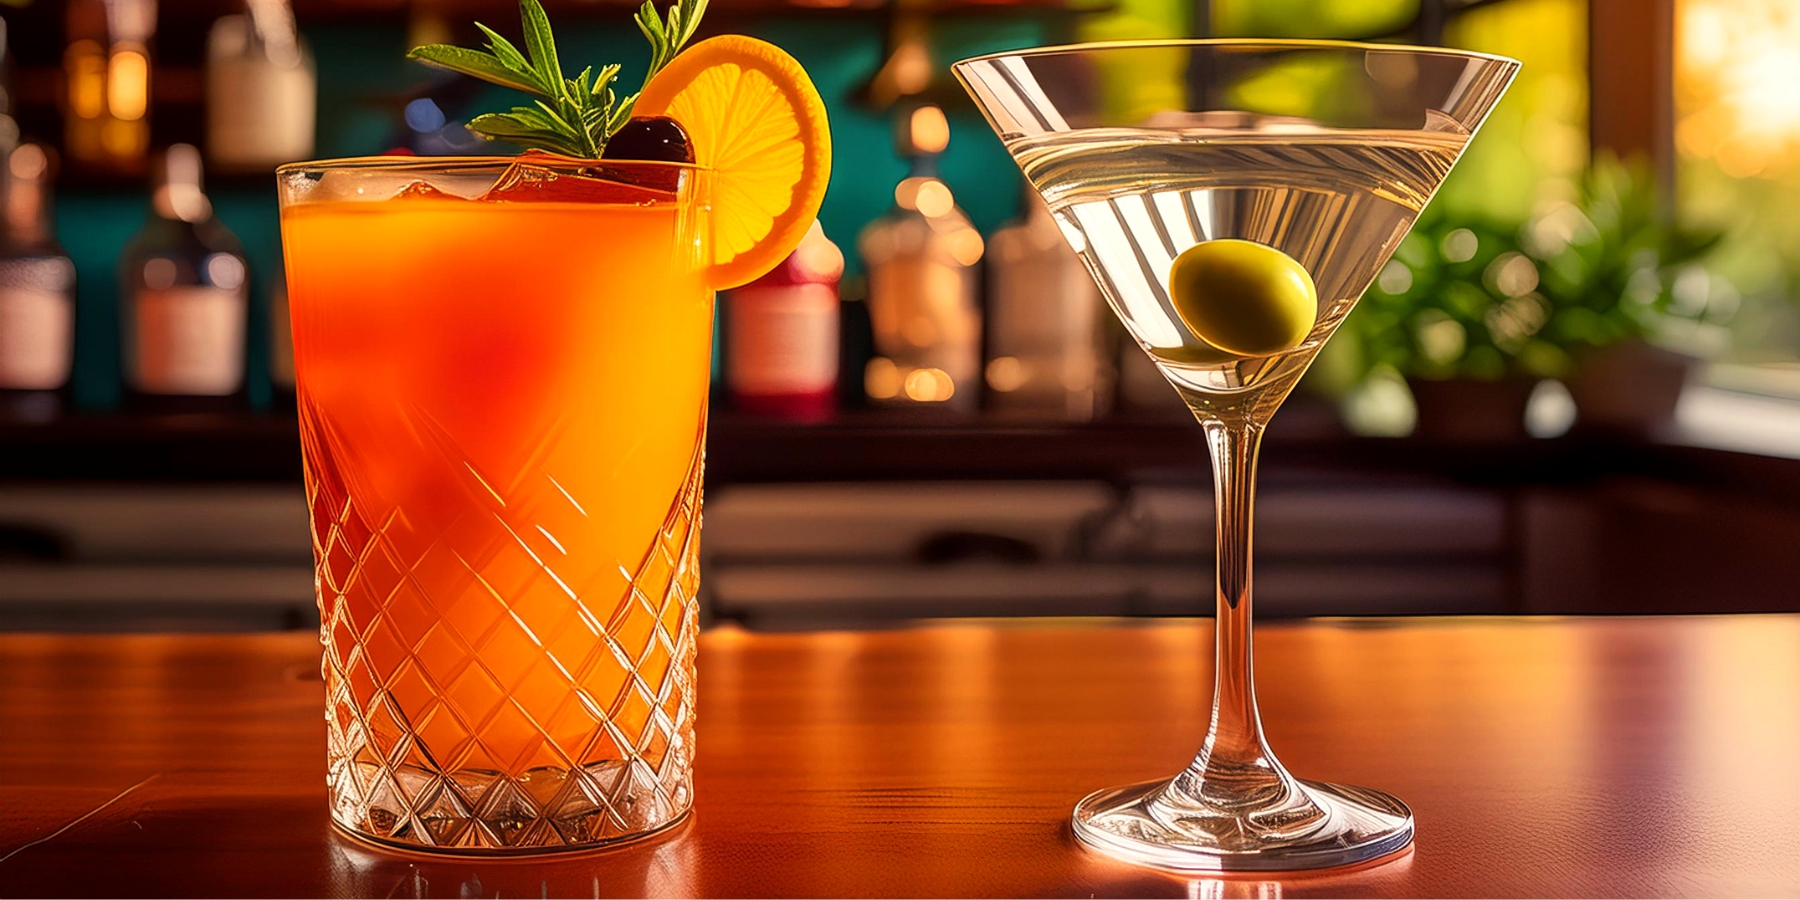 A Tequila Sunrise cocktail next to a classic Vodka Martini